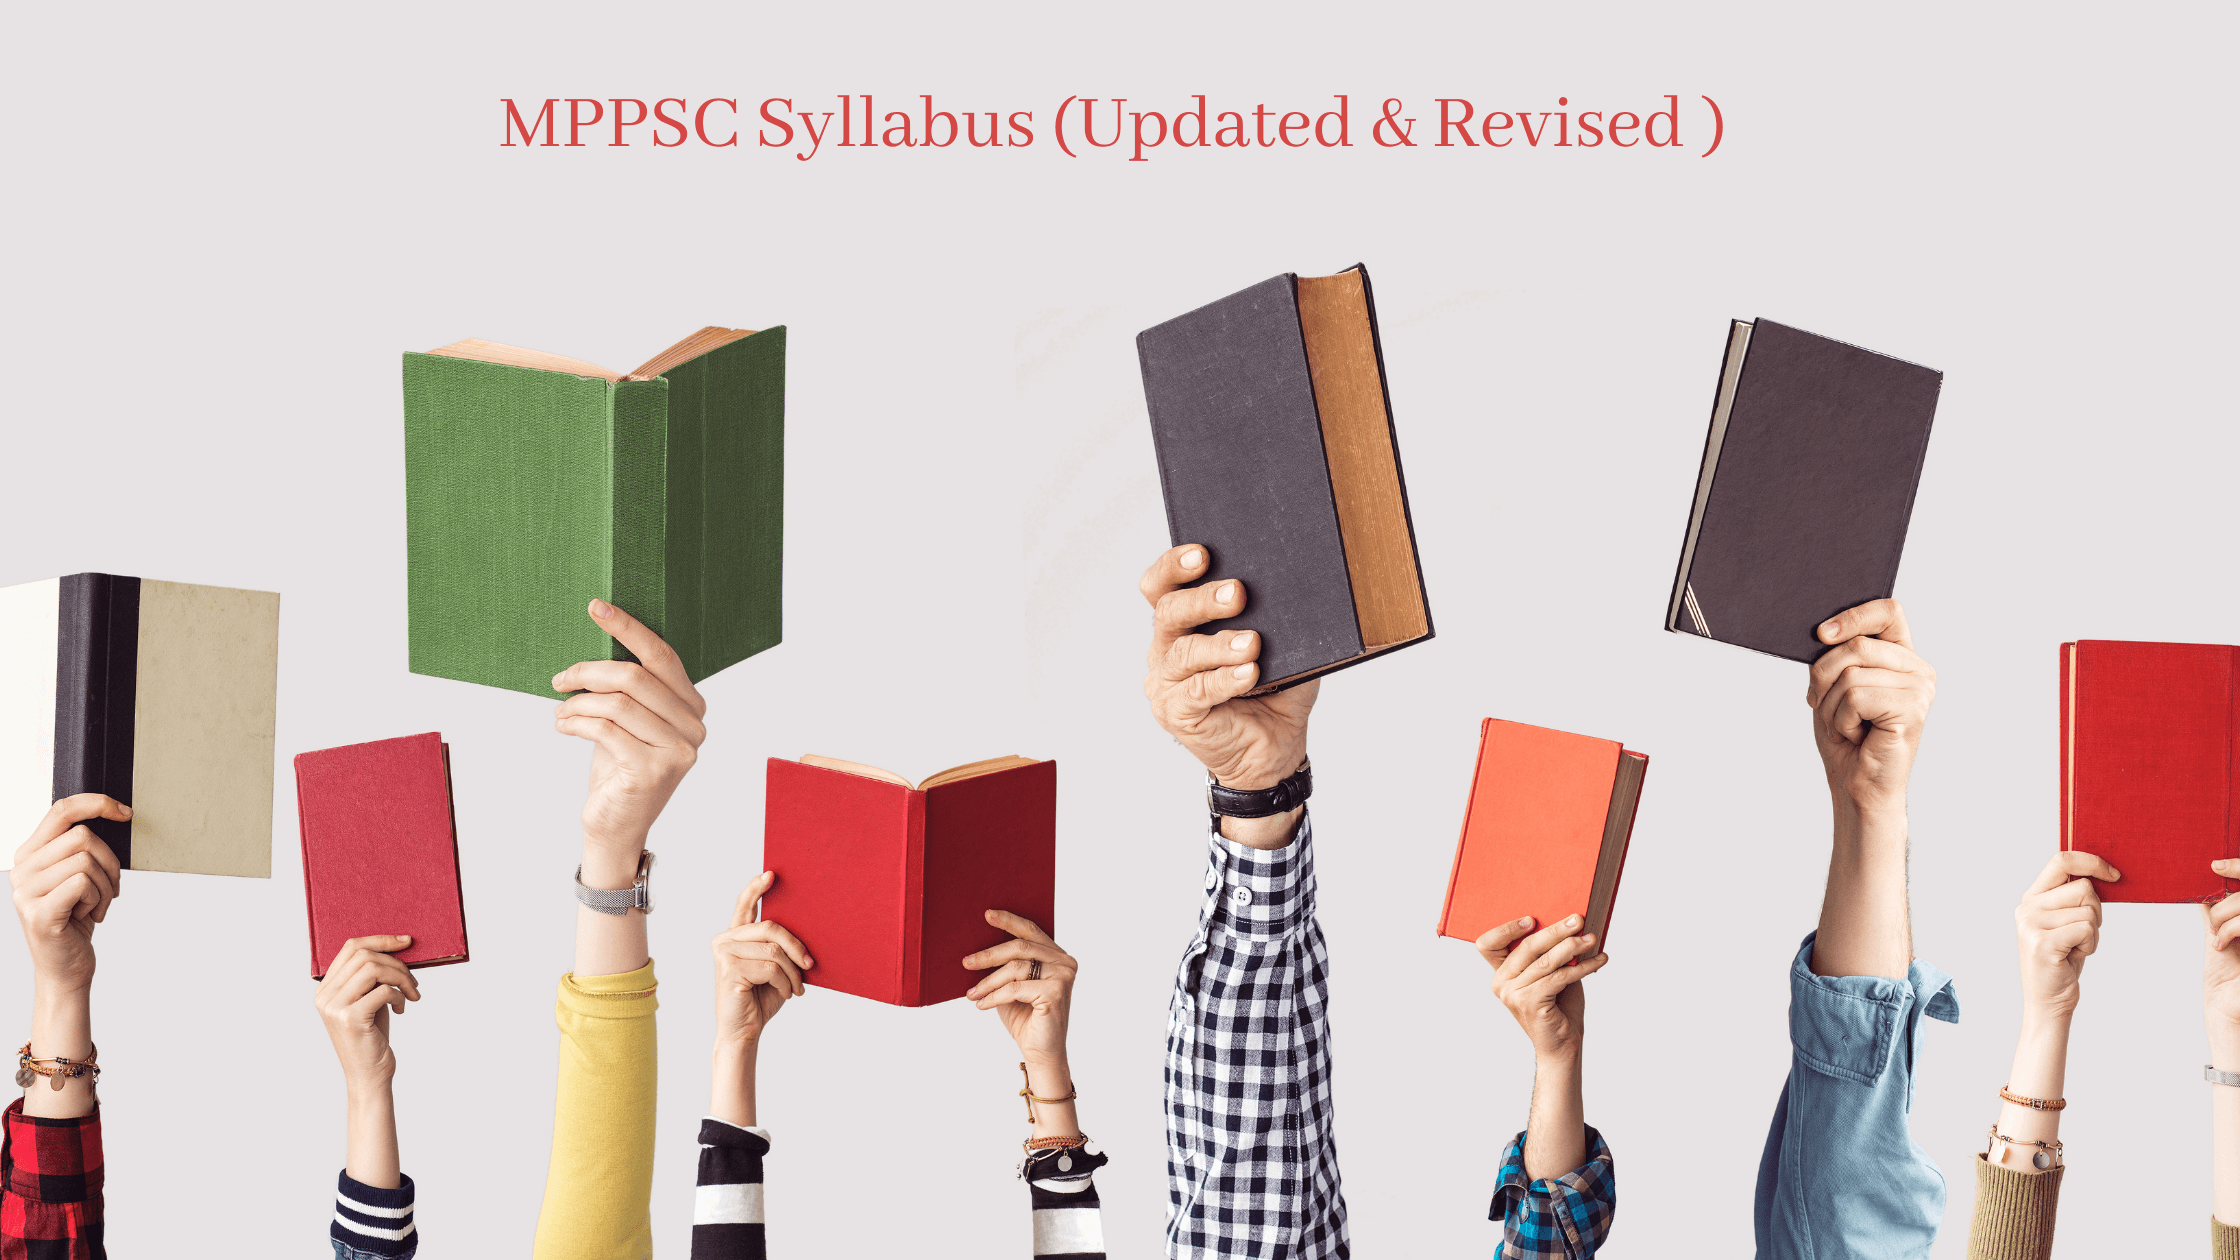 MPPSC Syllabus unique ias revised and updated